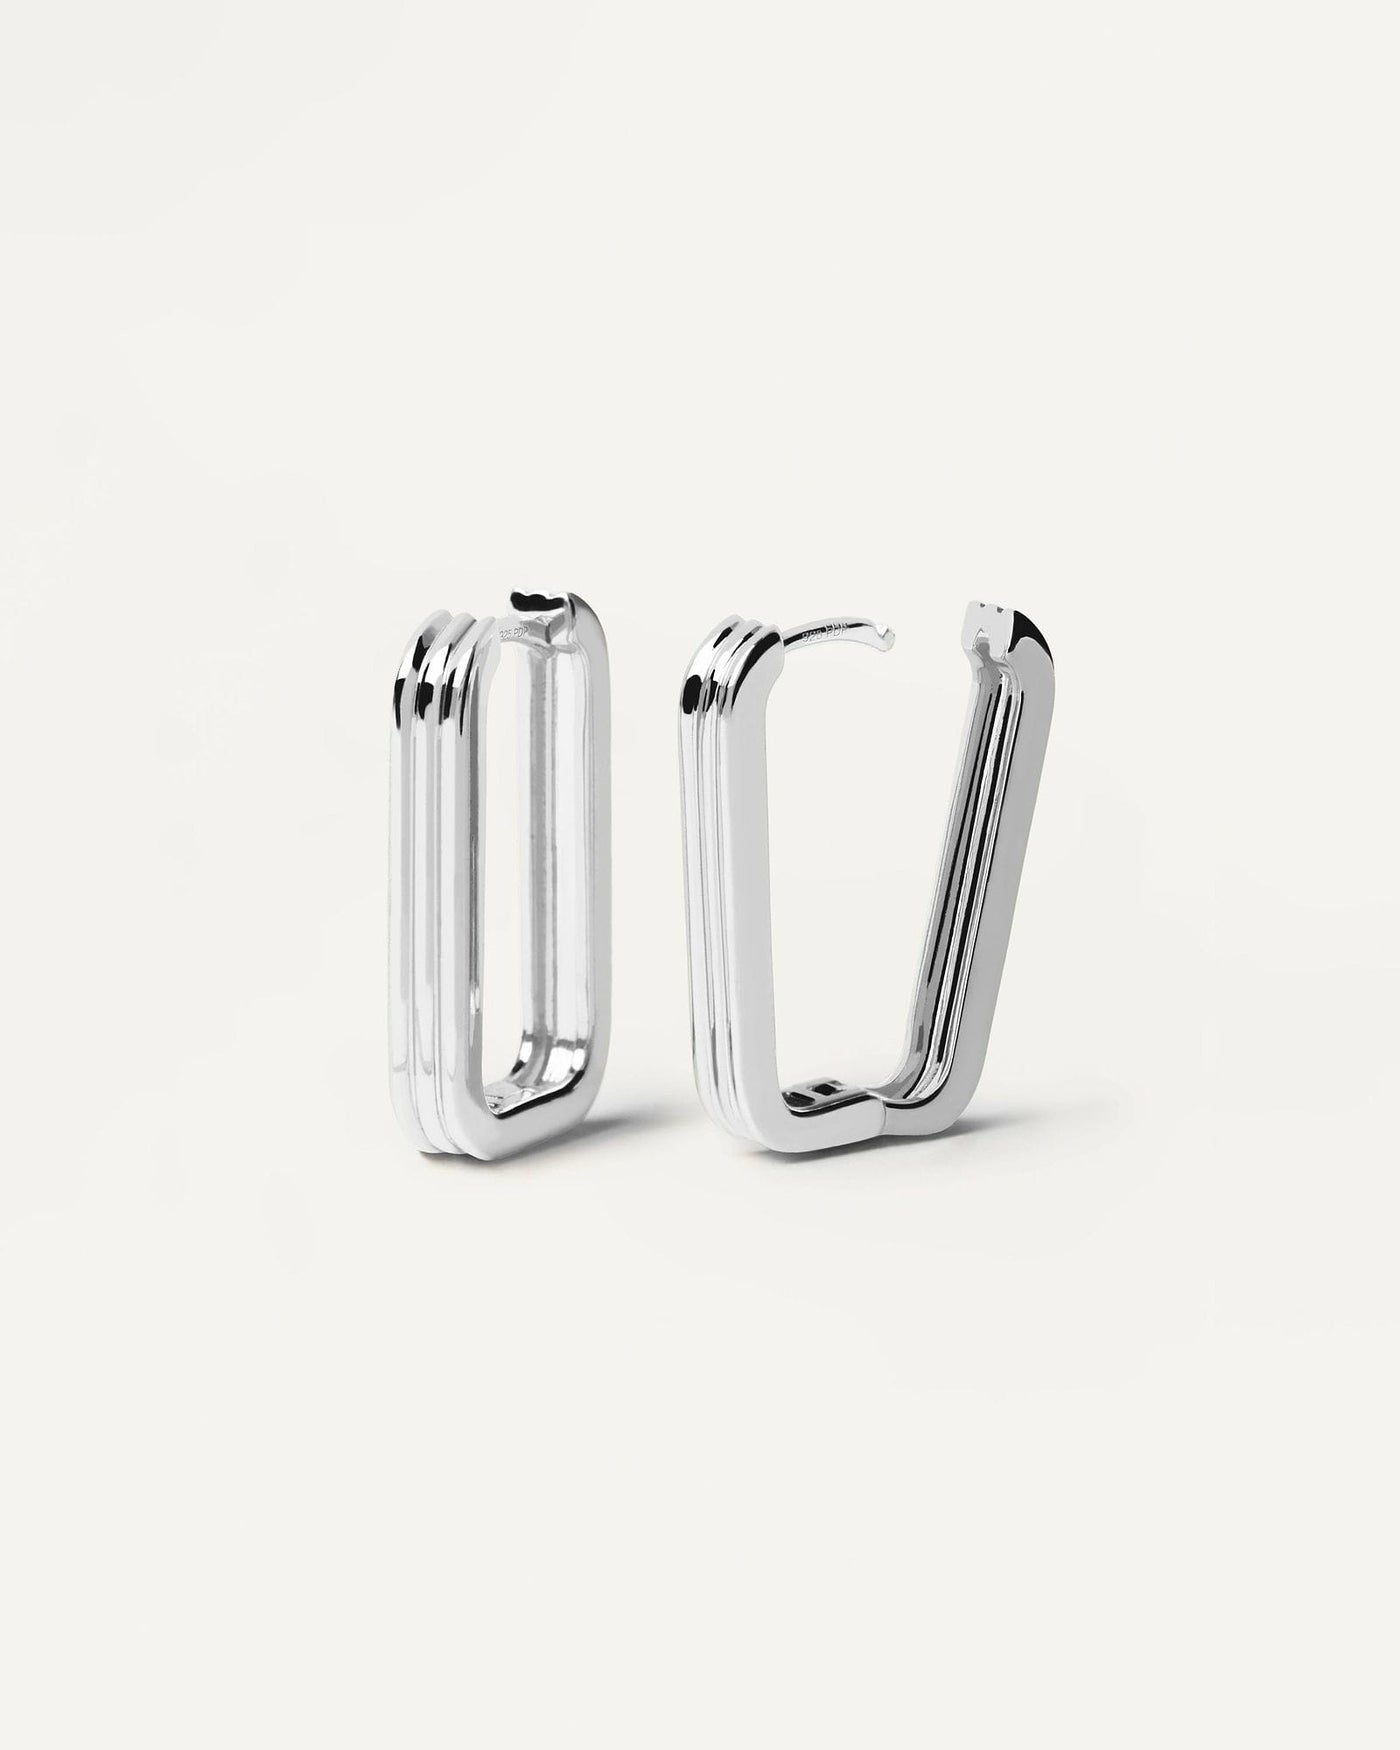 2024 Selection | Super Nova Silver Earrings. Squarred hoops in sterling silver with 3 bands design. Get the latest arrival from PDPAOLA. Place your order safely and get this Best Seller. Free Shipping.